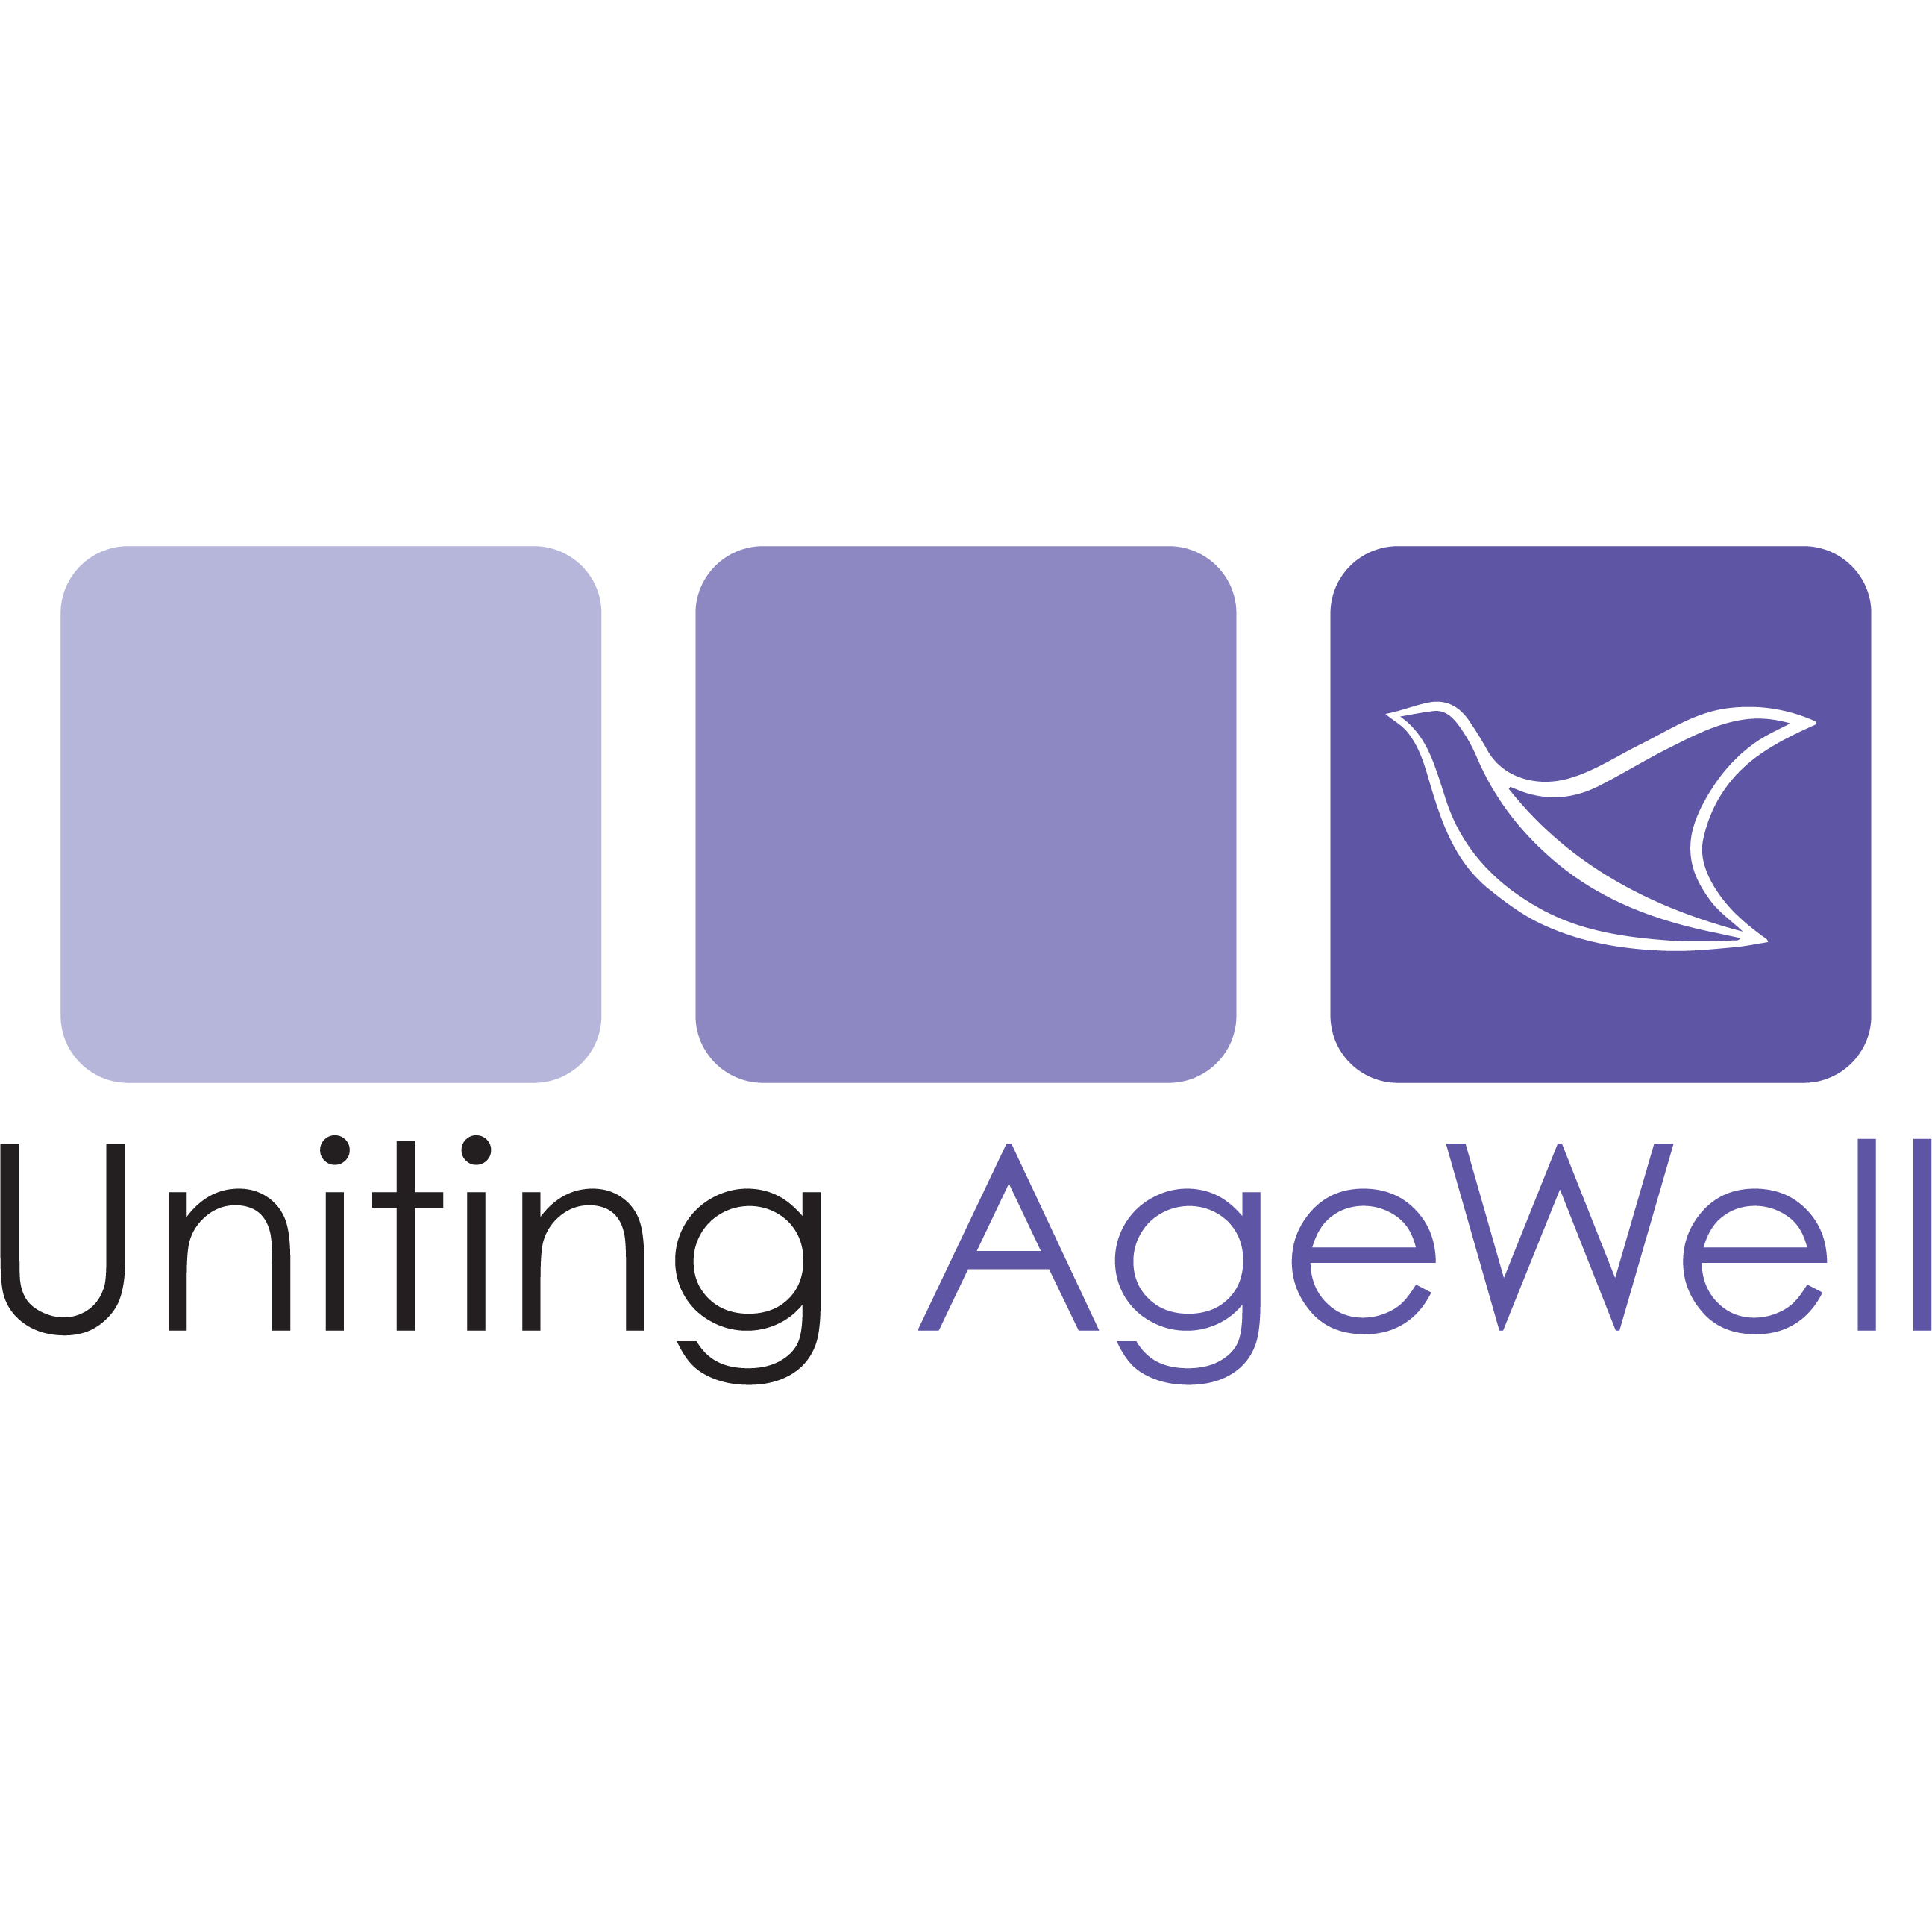 Foto de Uniting AgeWell Forest Hill AgeWell Centre